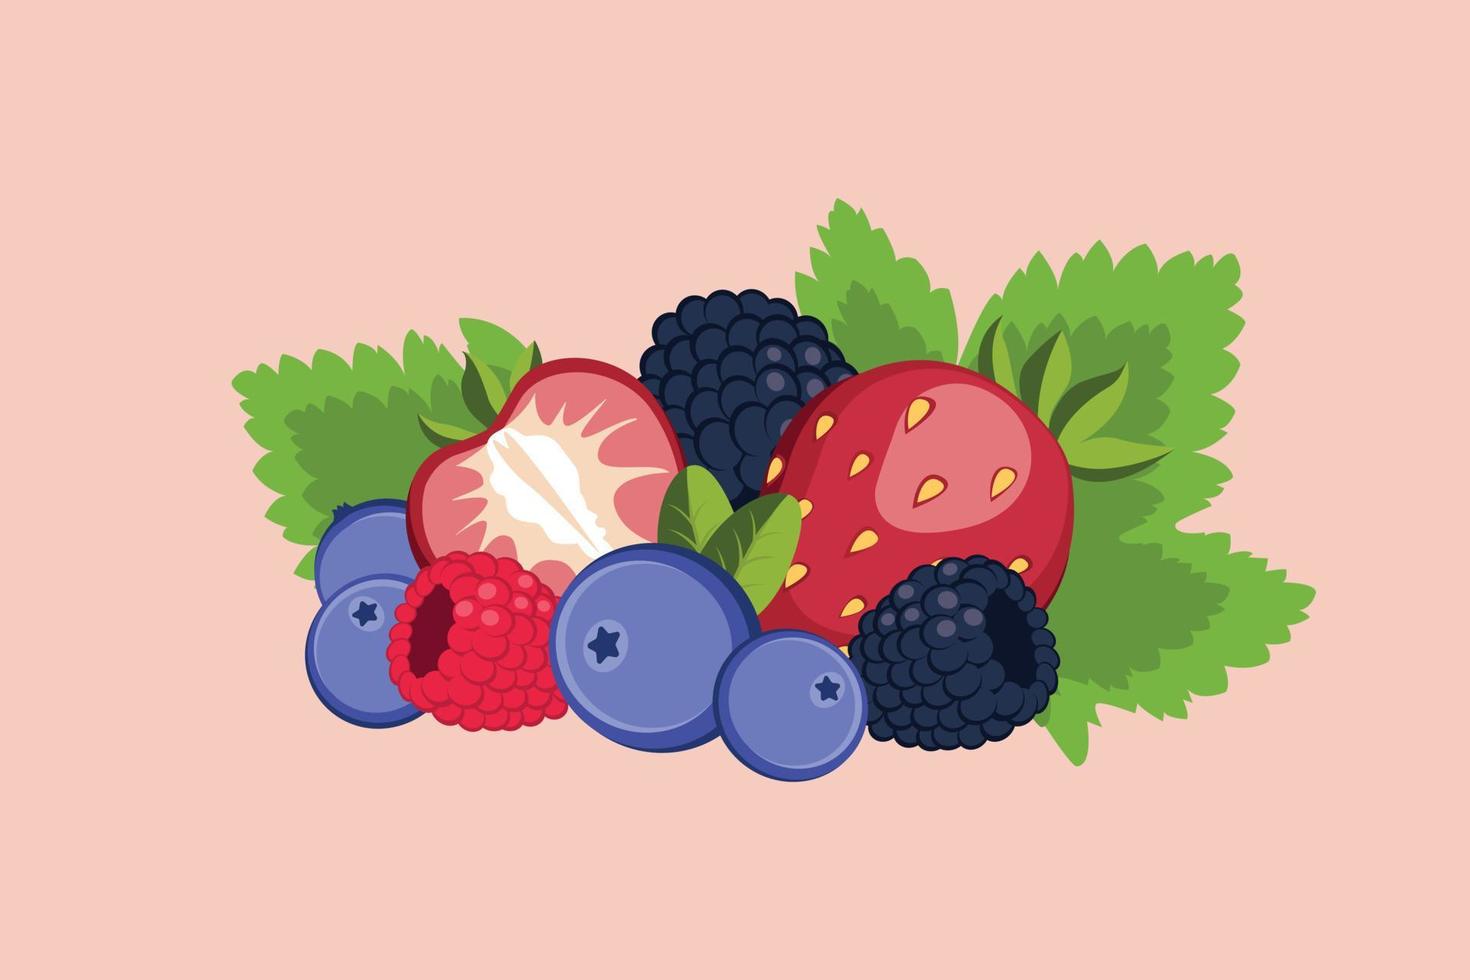 Vector fresh berries. Forest berries. Berry fruit set with bunches of ripe berries and images of green leaves. Strawberries, raspberries, blackberries and blueberries.